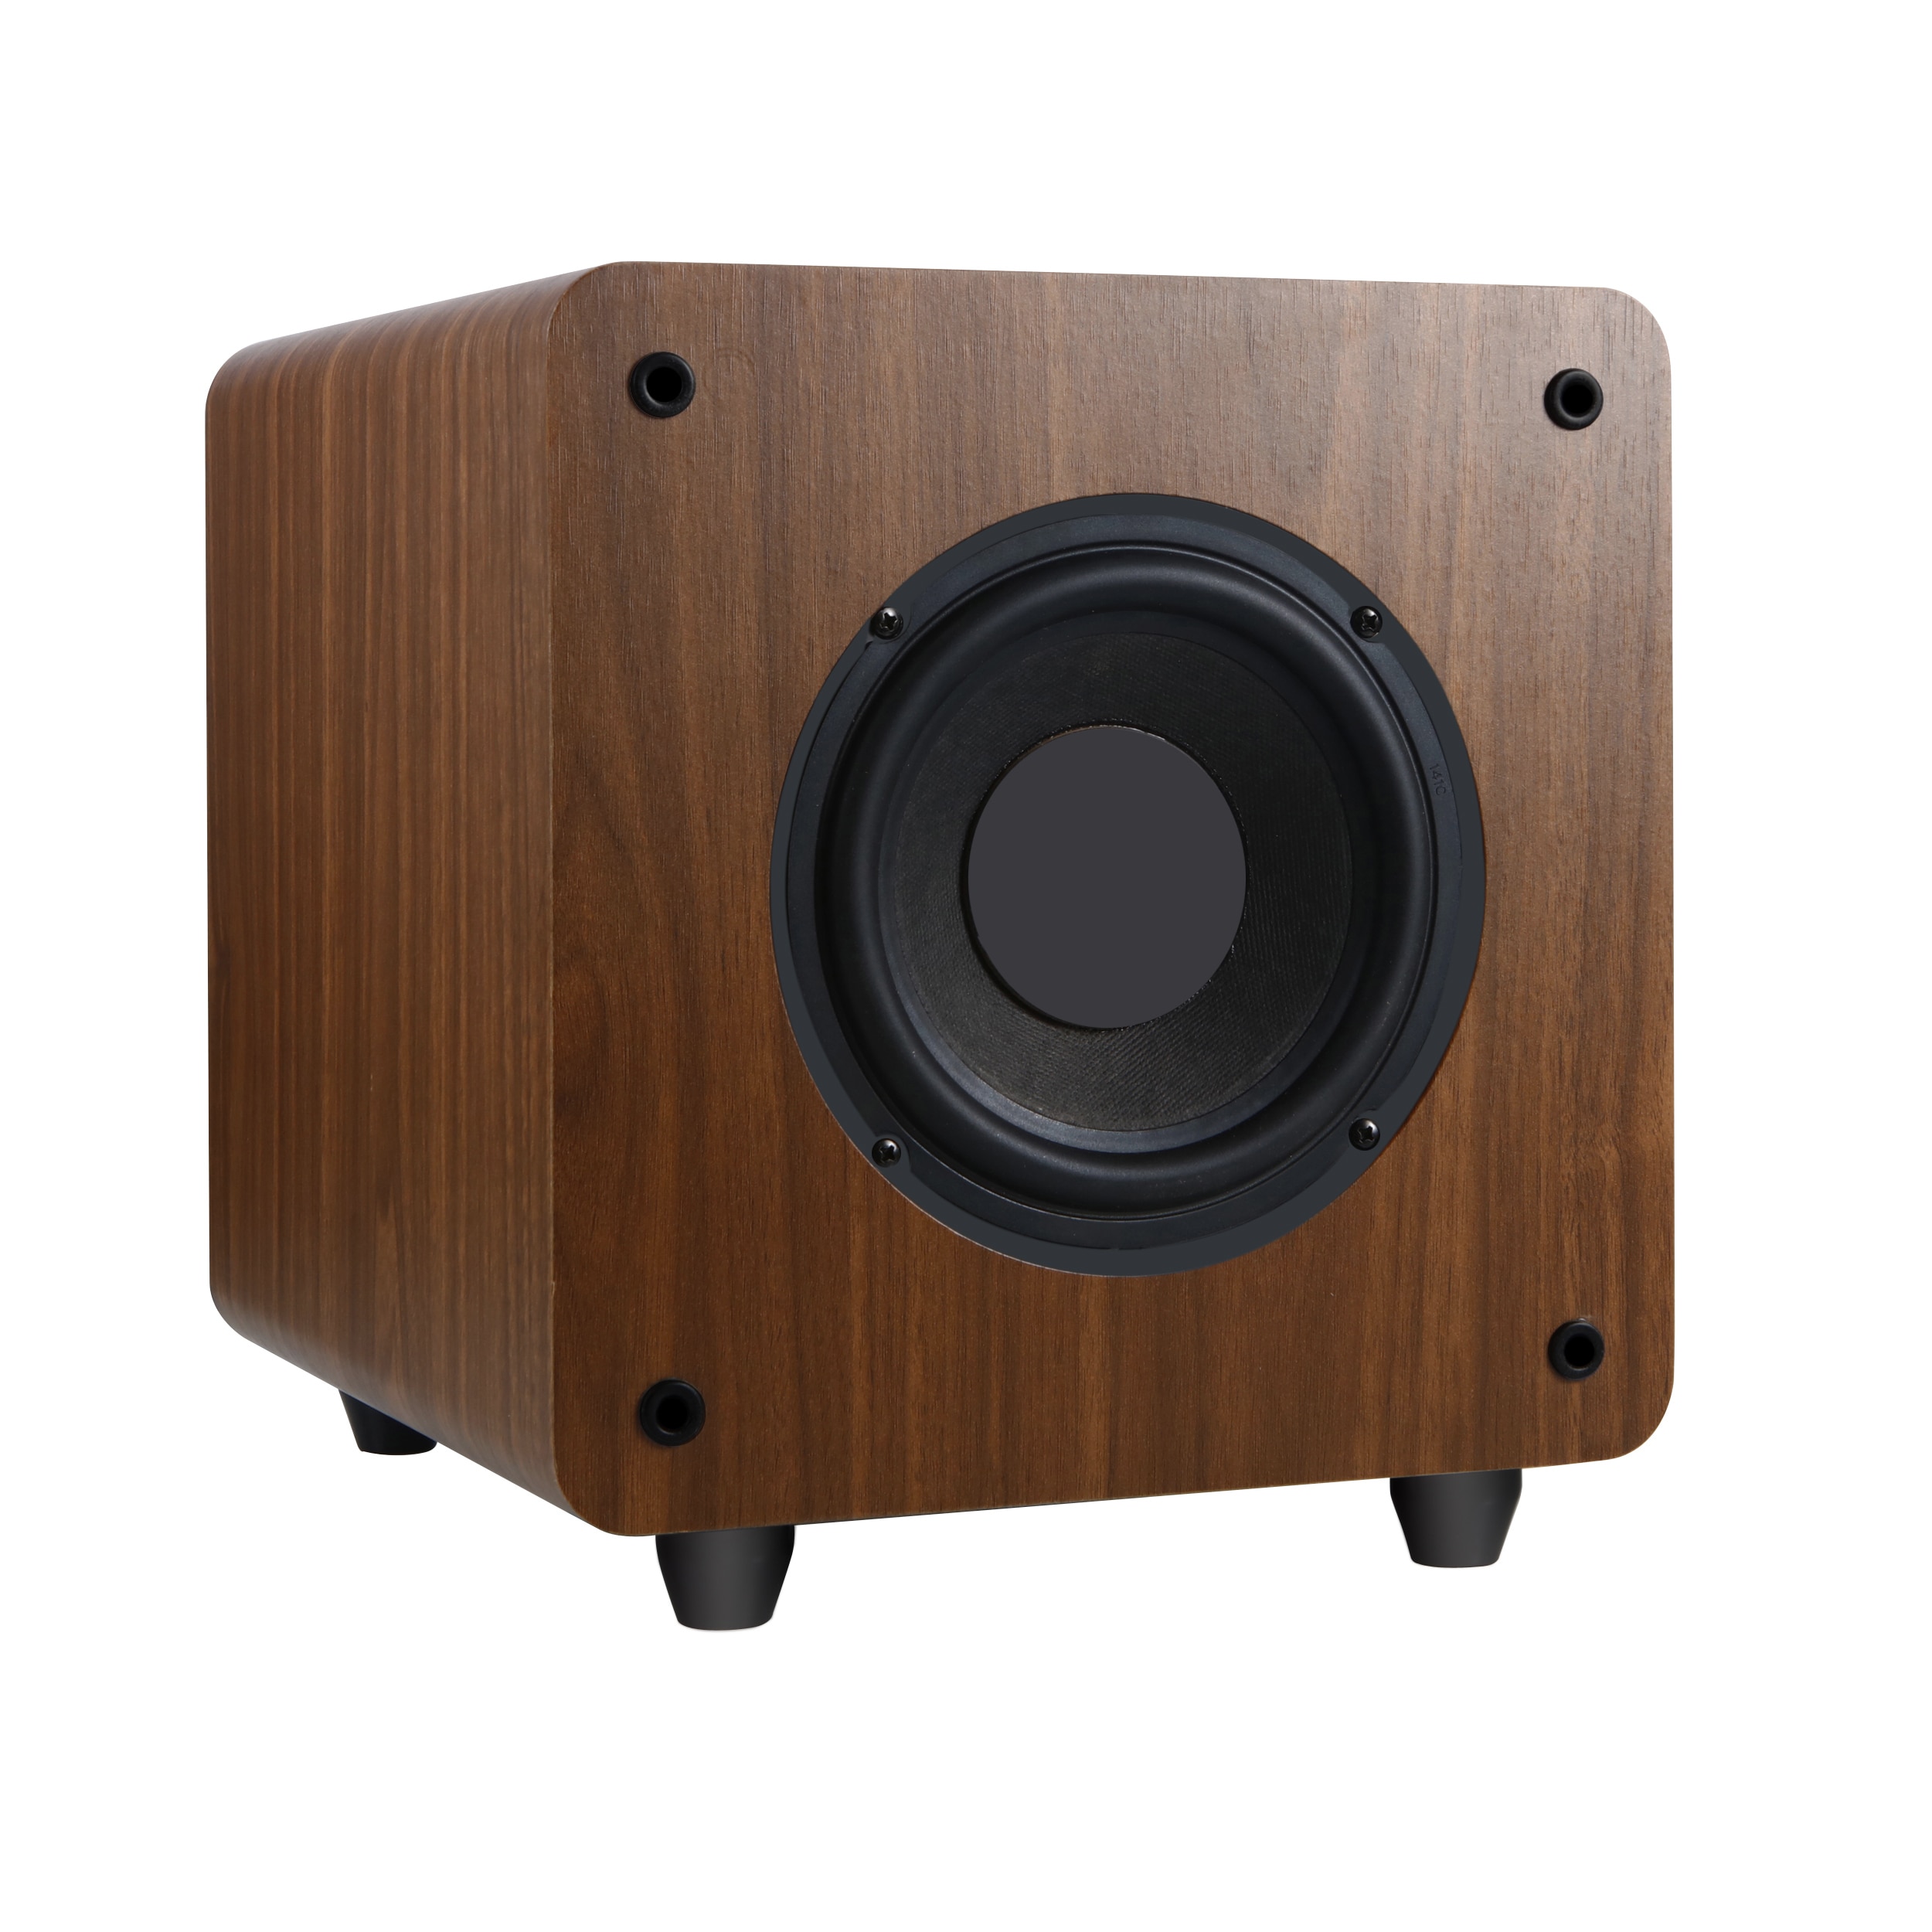 High Power Subwoofer 50W Wooden Speaker 6 Inch Home Theater with Sound Bar 3D Stereo Column Surround Echo Gallery TV SoundBox